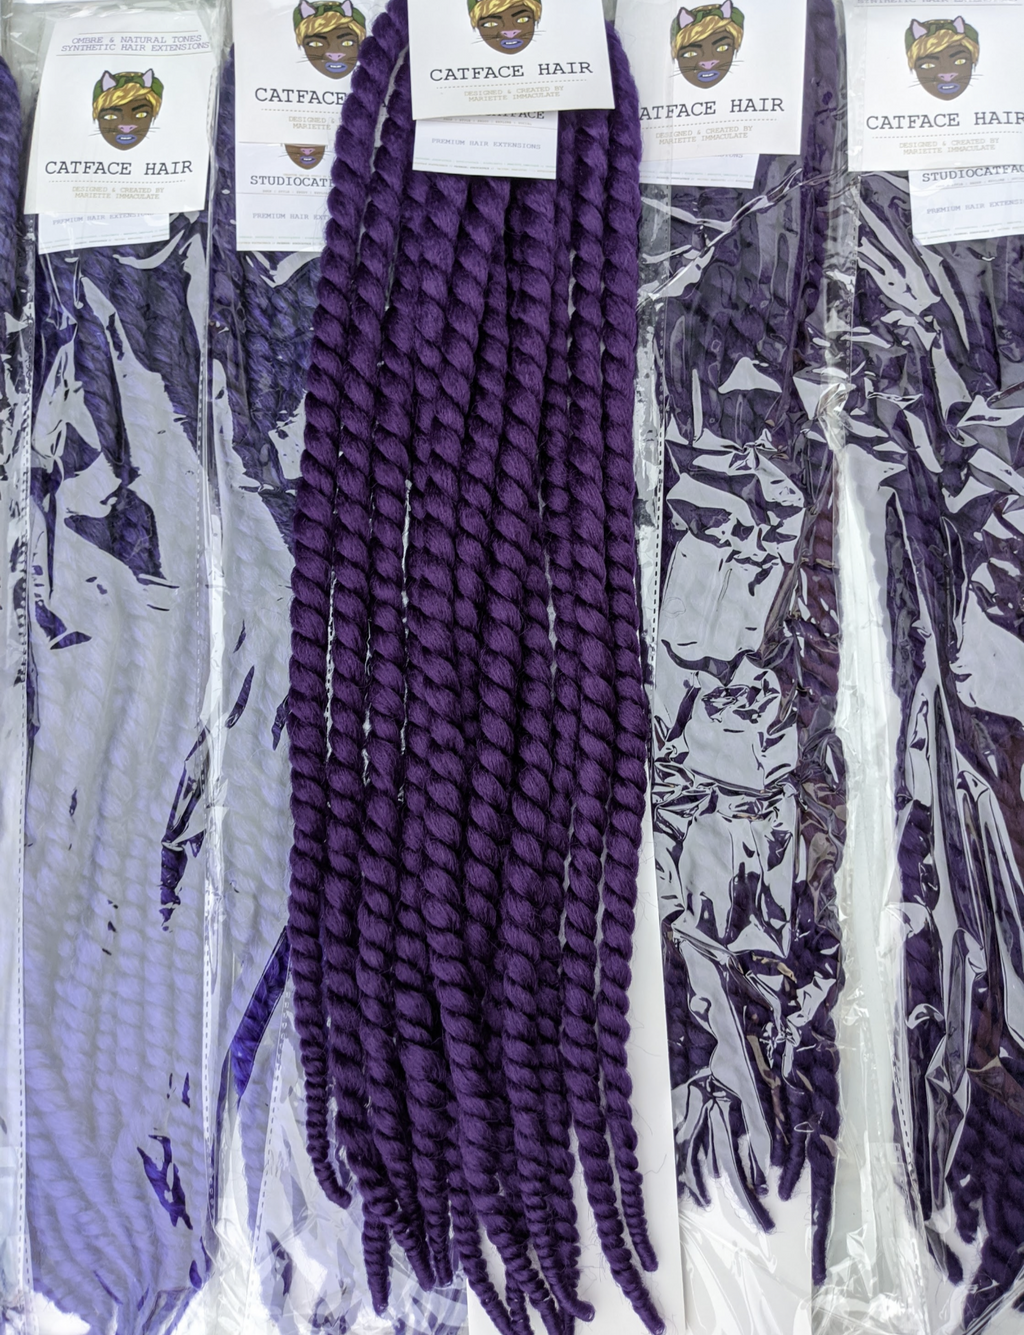 MIDNIGHT PURPLE LARGE ROPETWISTS CROCHET BRAID 24 INCHES CATFACE HAIR